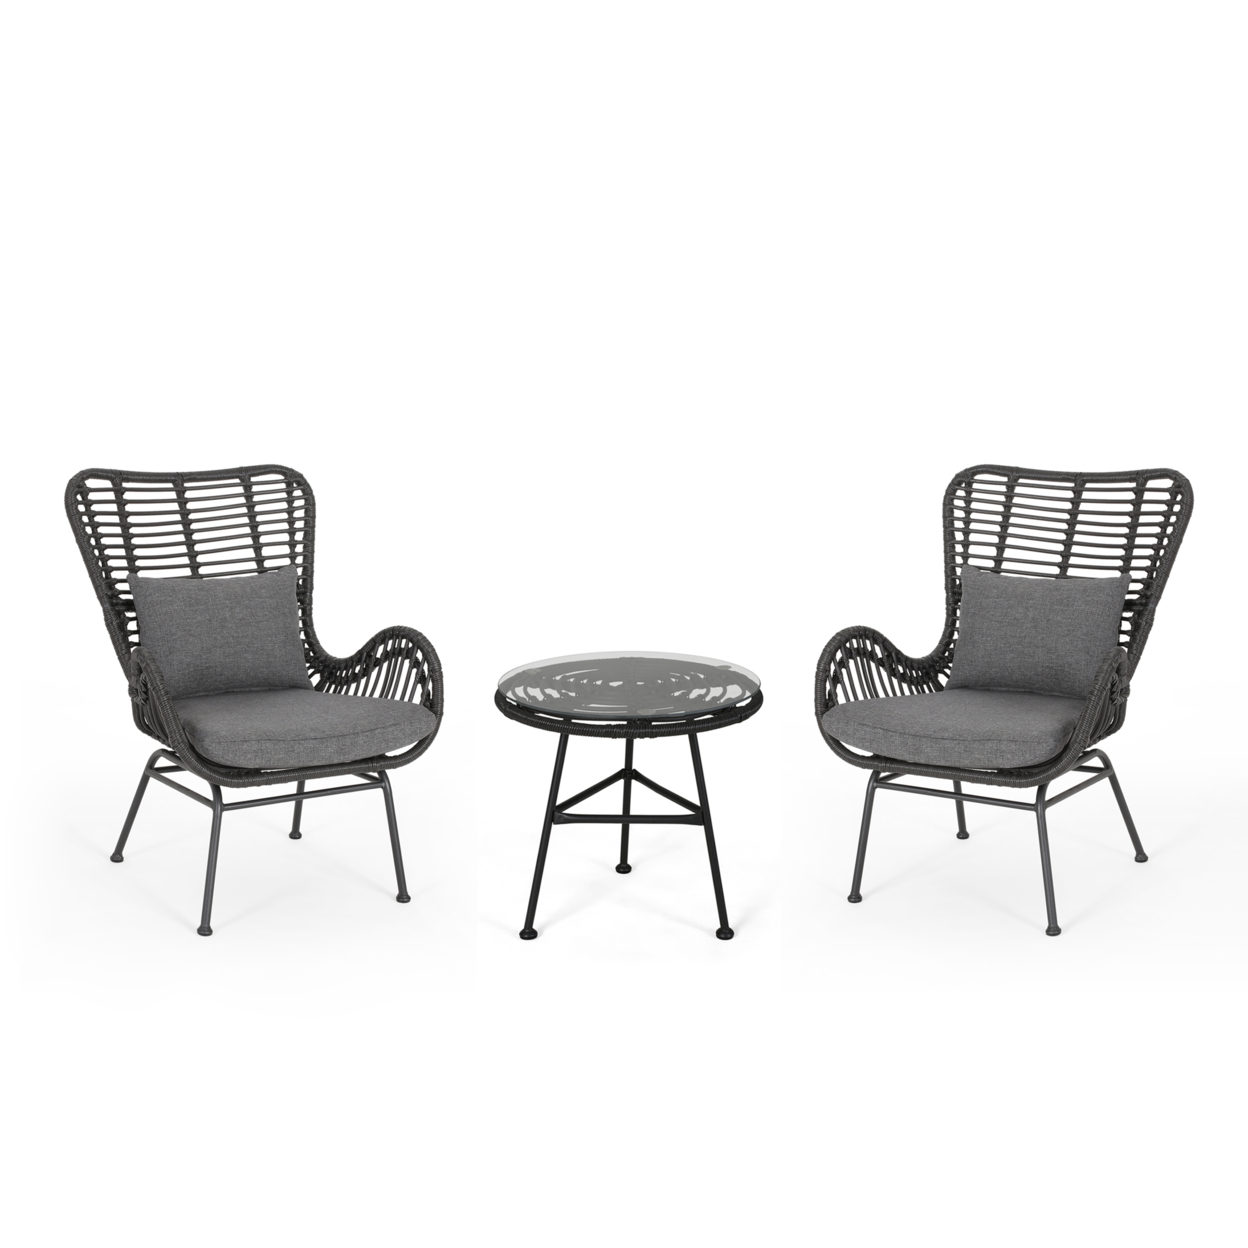 Naomi Outdoor 3 Piece Wicker Chat Set With Cushions - Gray, Black, Dark Gray